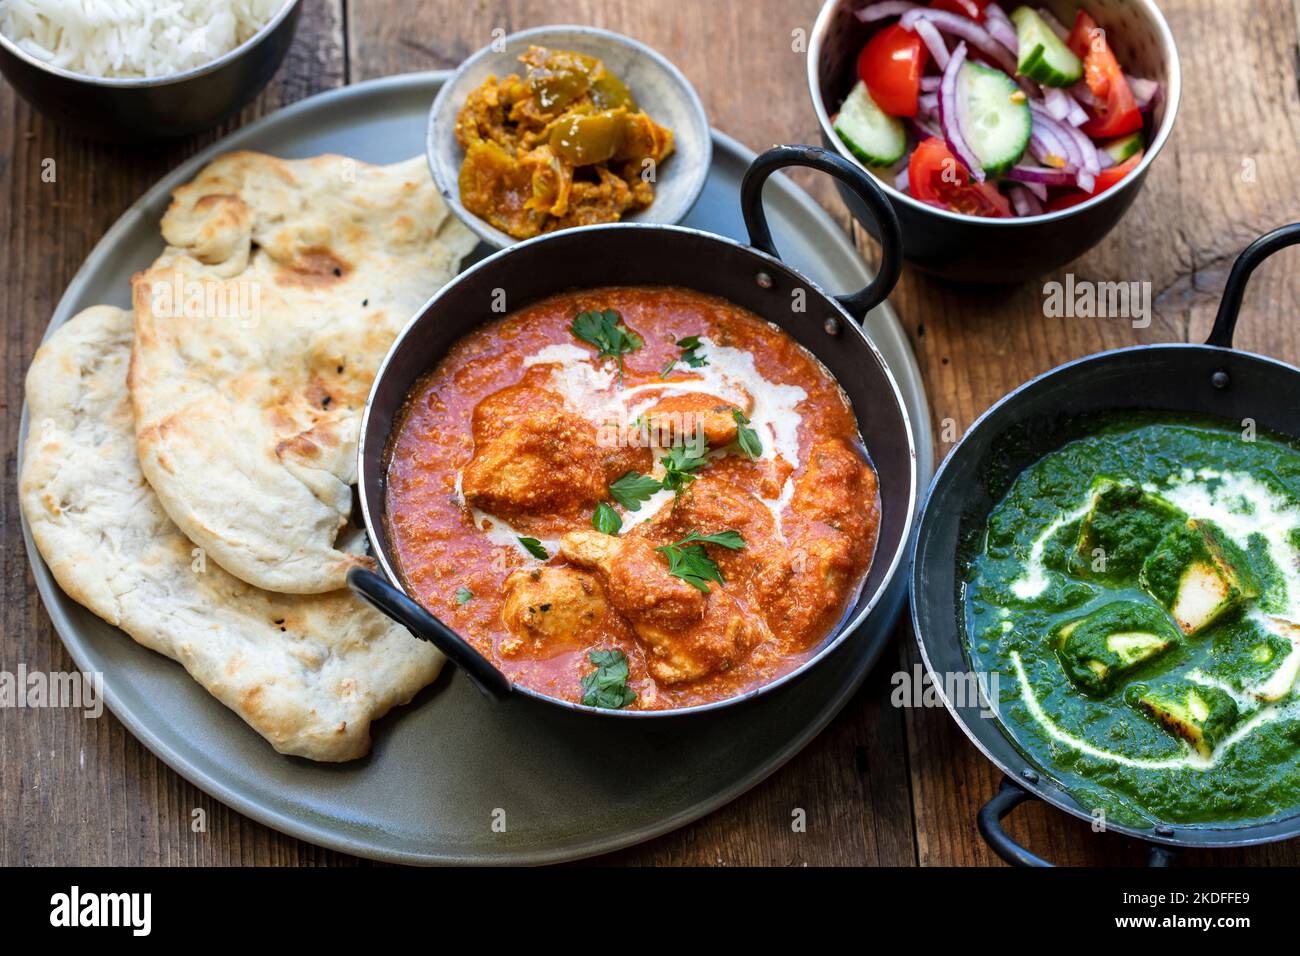 Butter chicken, saag paneer, toamto salad and naan bread Stock Photo